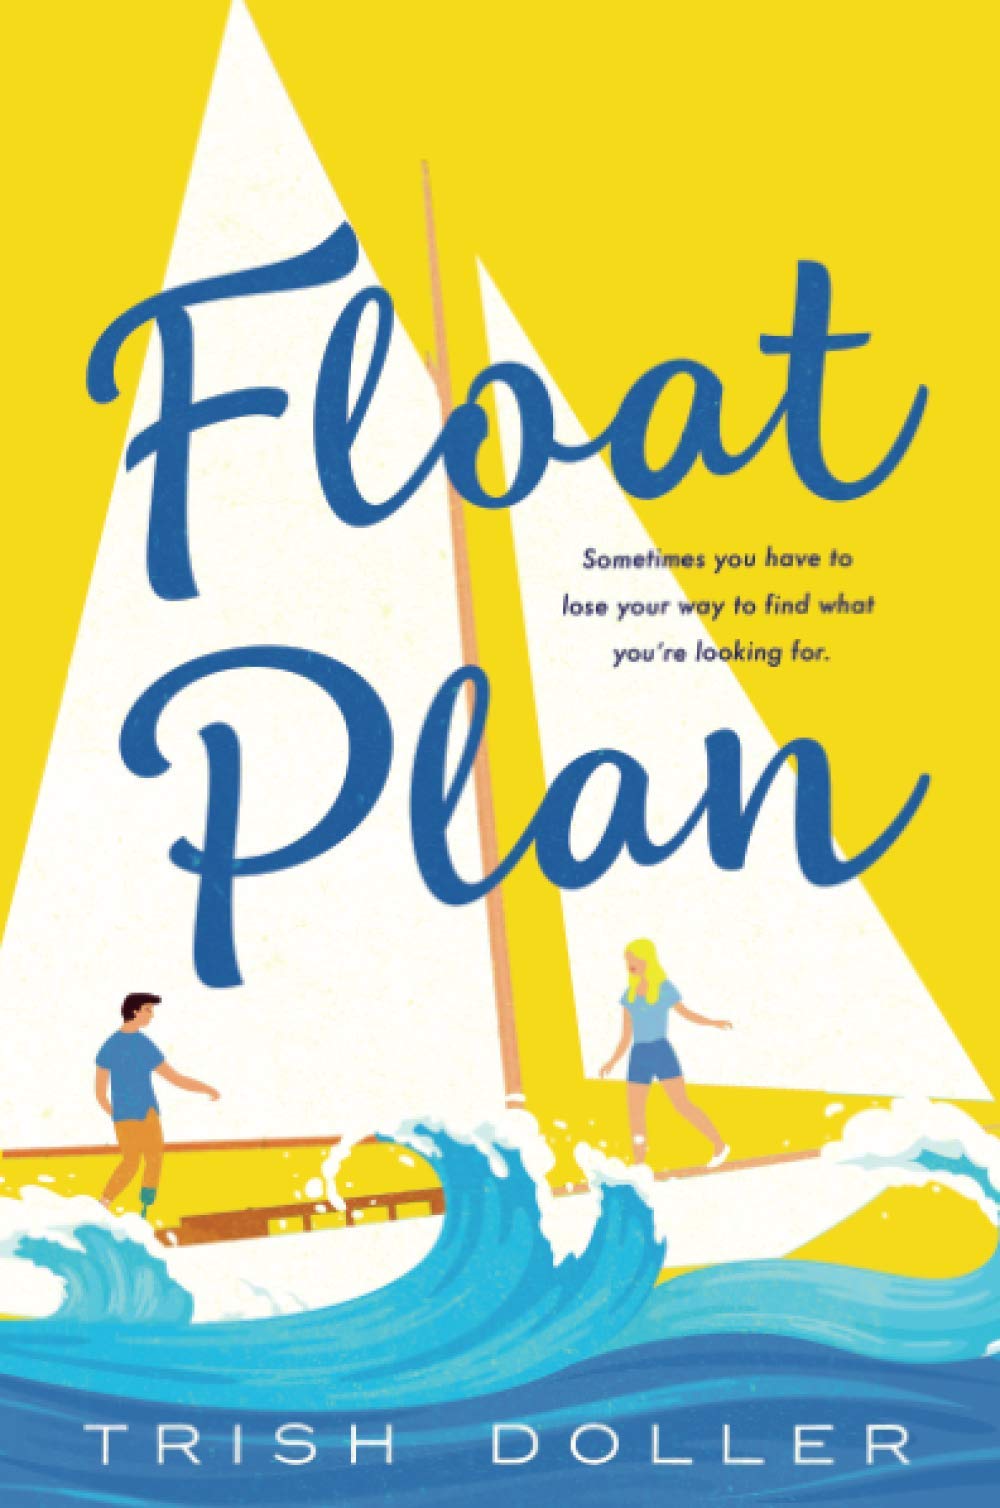 Image for "Float Plan"